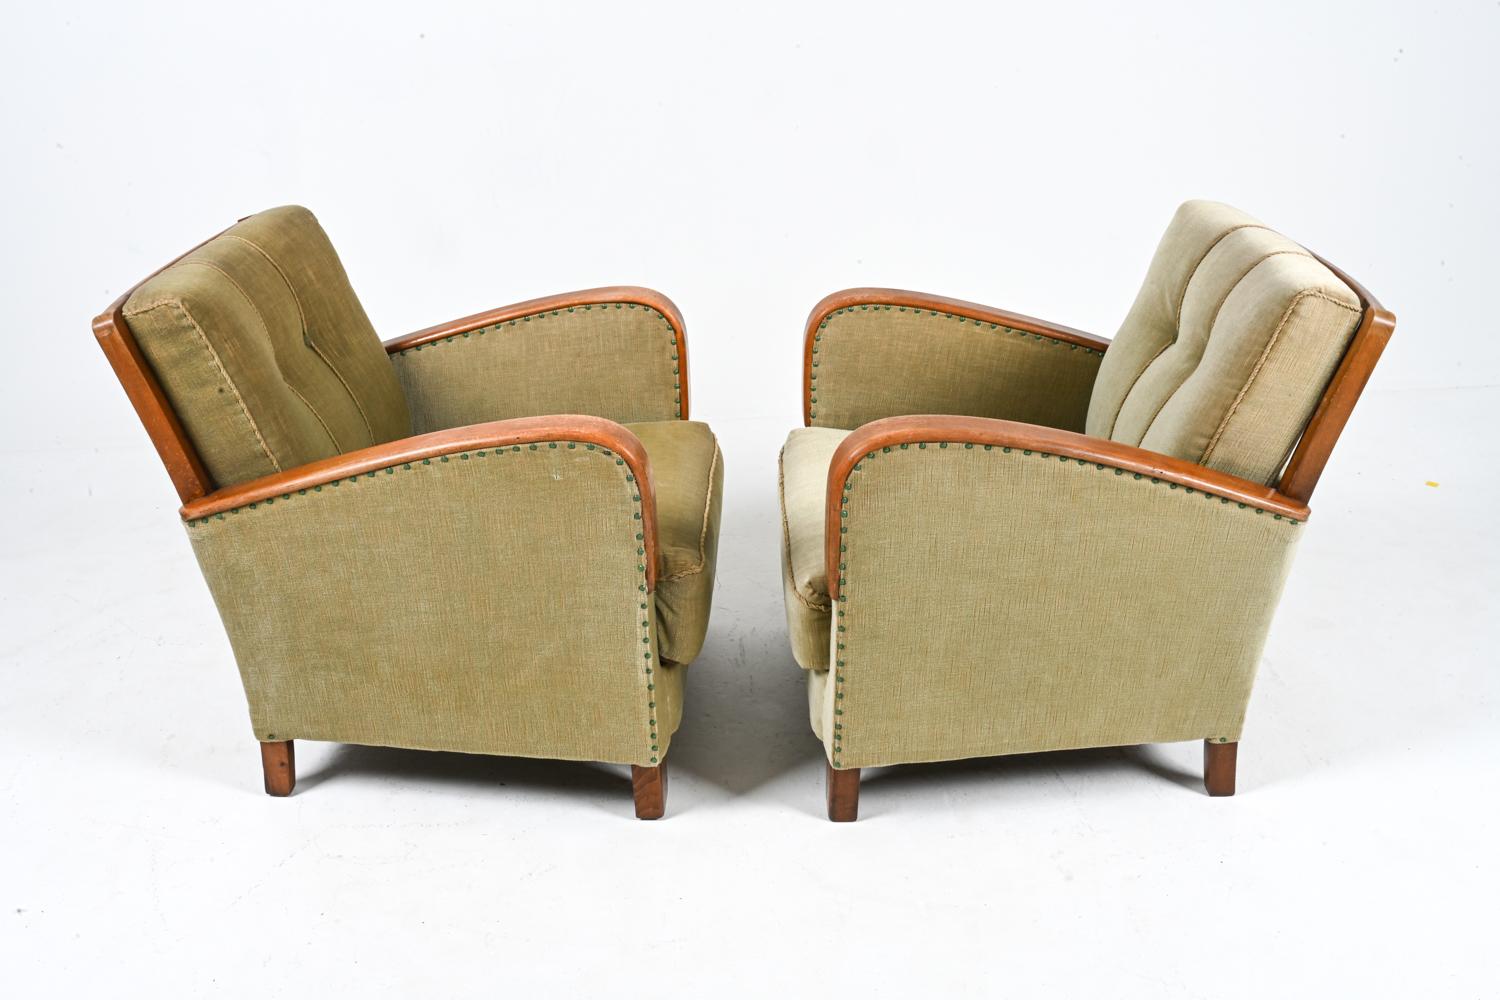 Pair of German Art Deco Oak Easy Chairs, c. 1940's For Sale 4